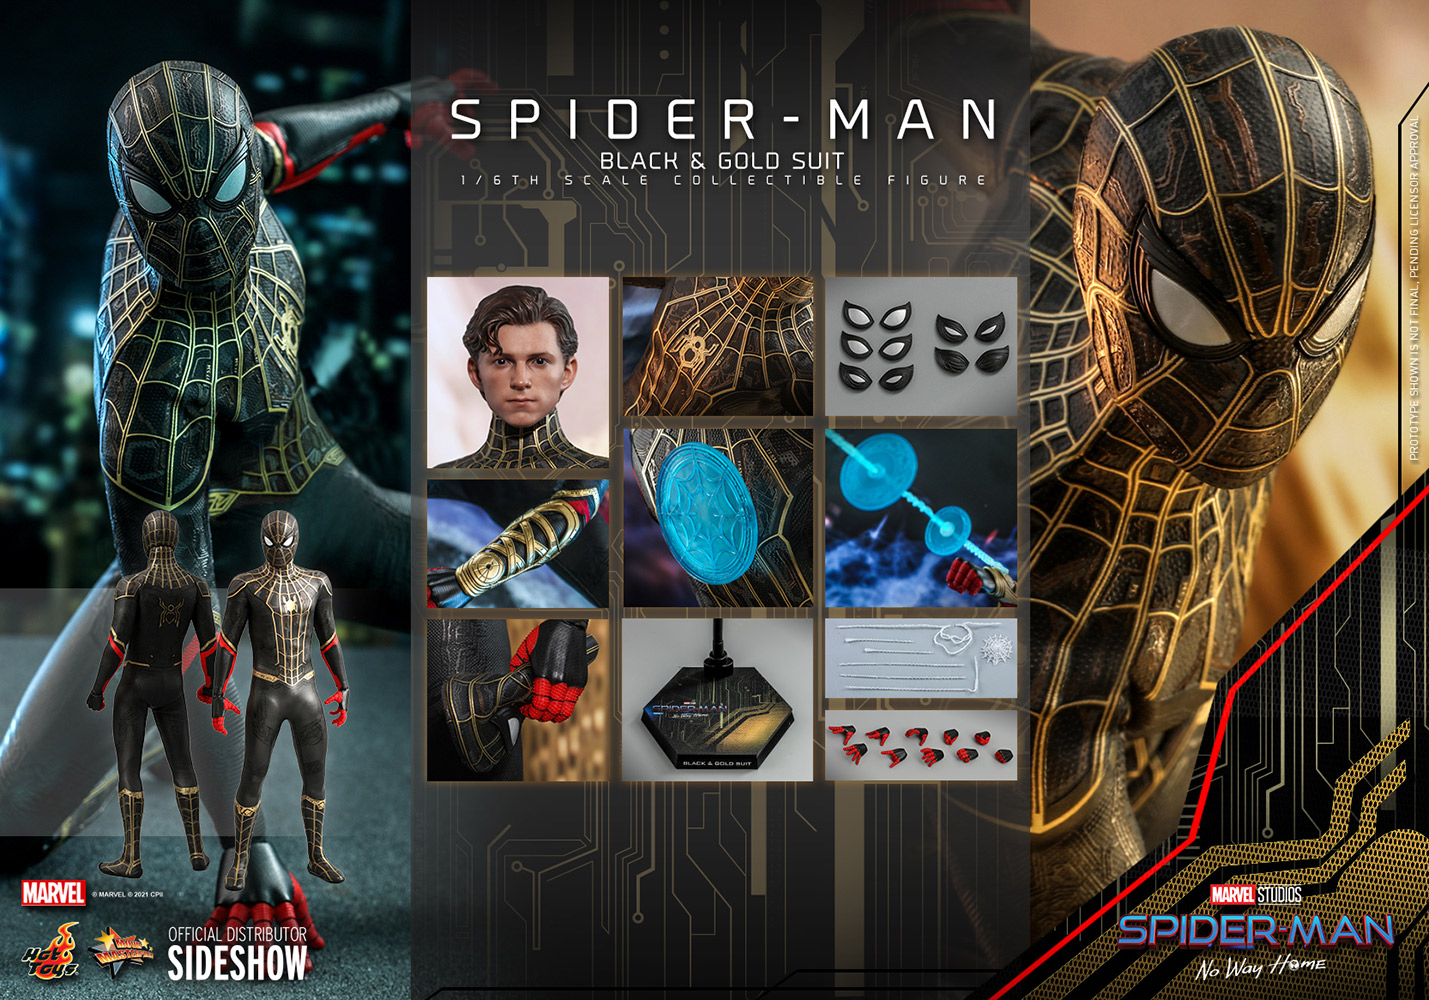 Spider-Man (Black & Gold Suit) Sixth Scale Figure By Hot Toys